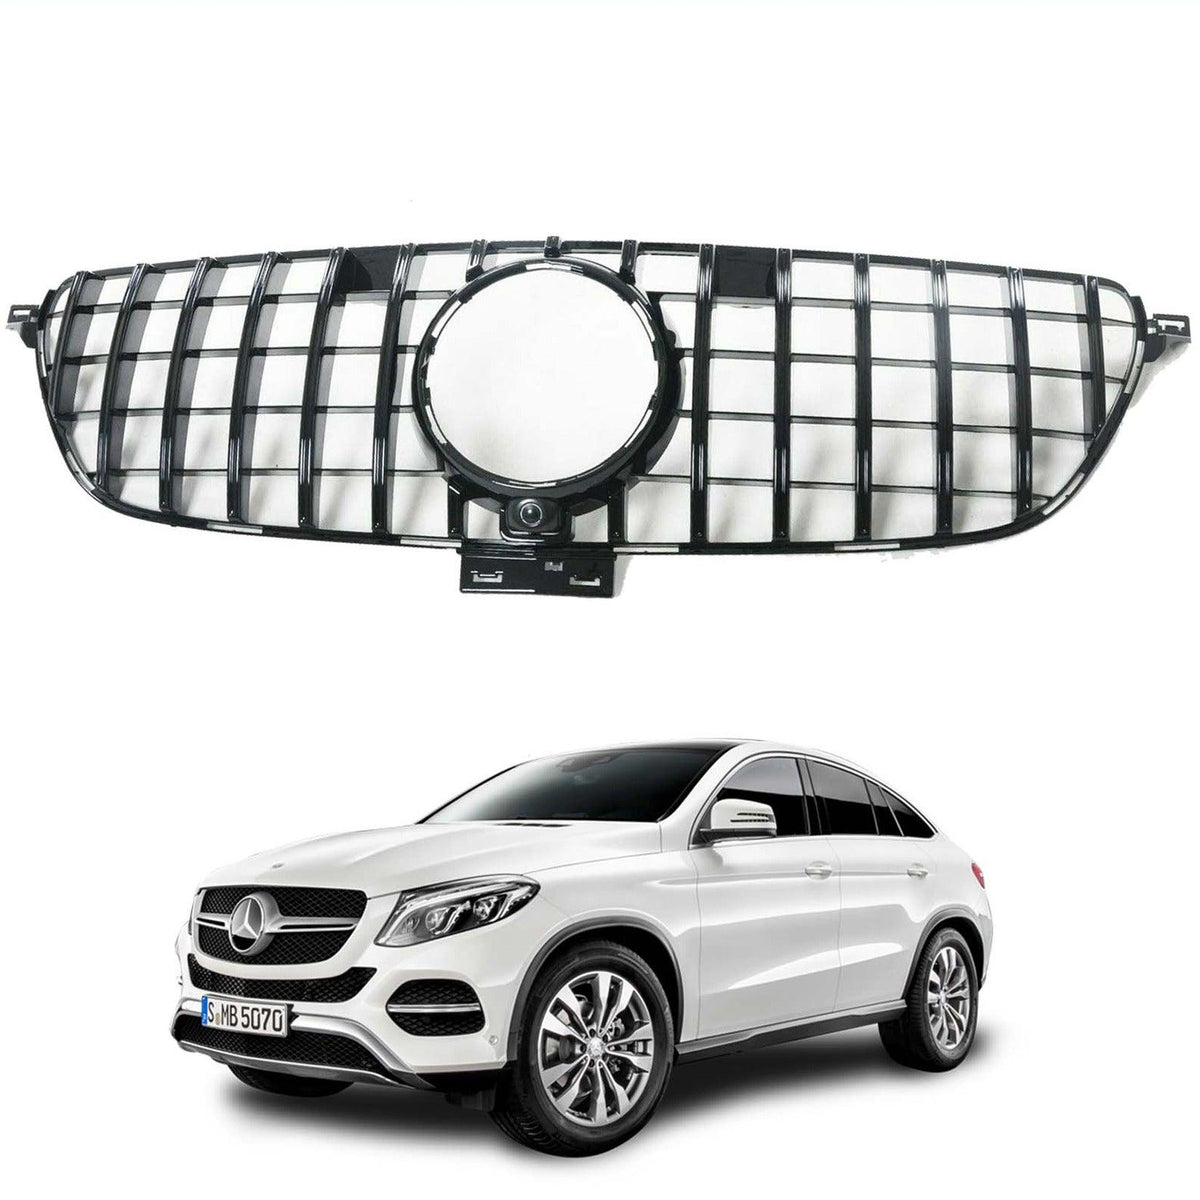 MERCEDES GLE COUPE C292 2015 ON - PANAMERICANA GT STYLE UPGRADE FRONT GRILLE - Storm Xccessories2